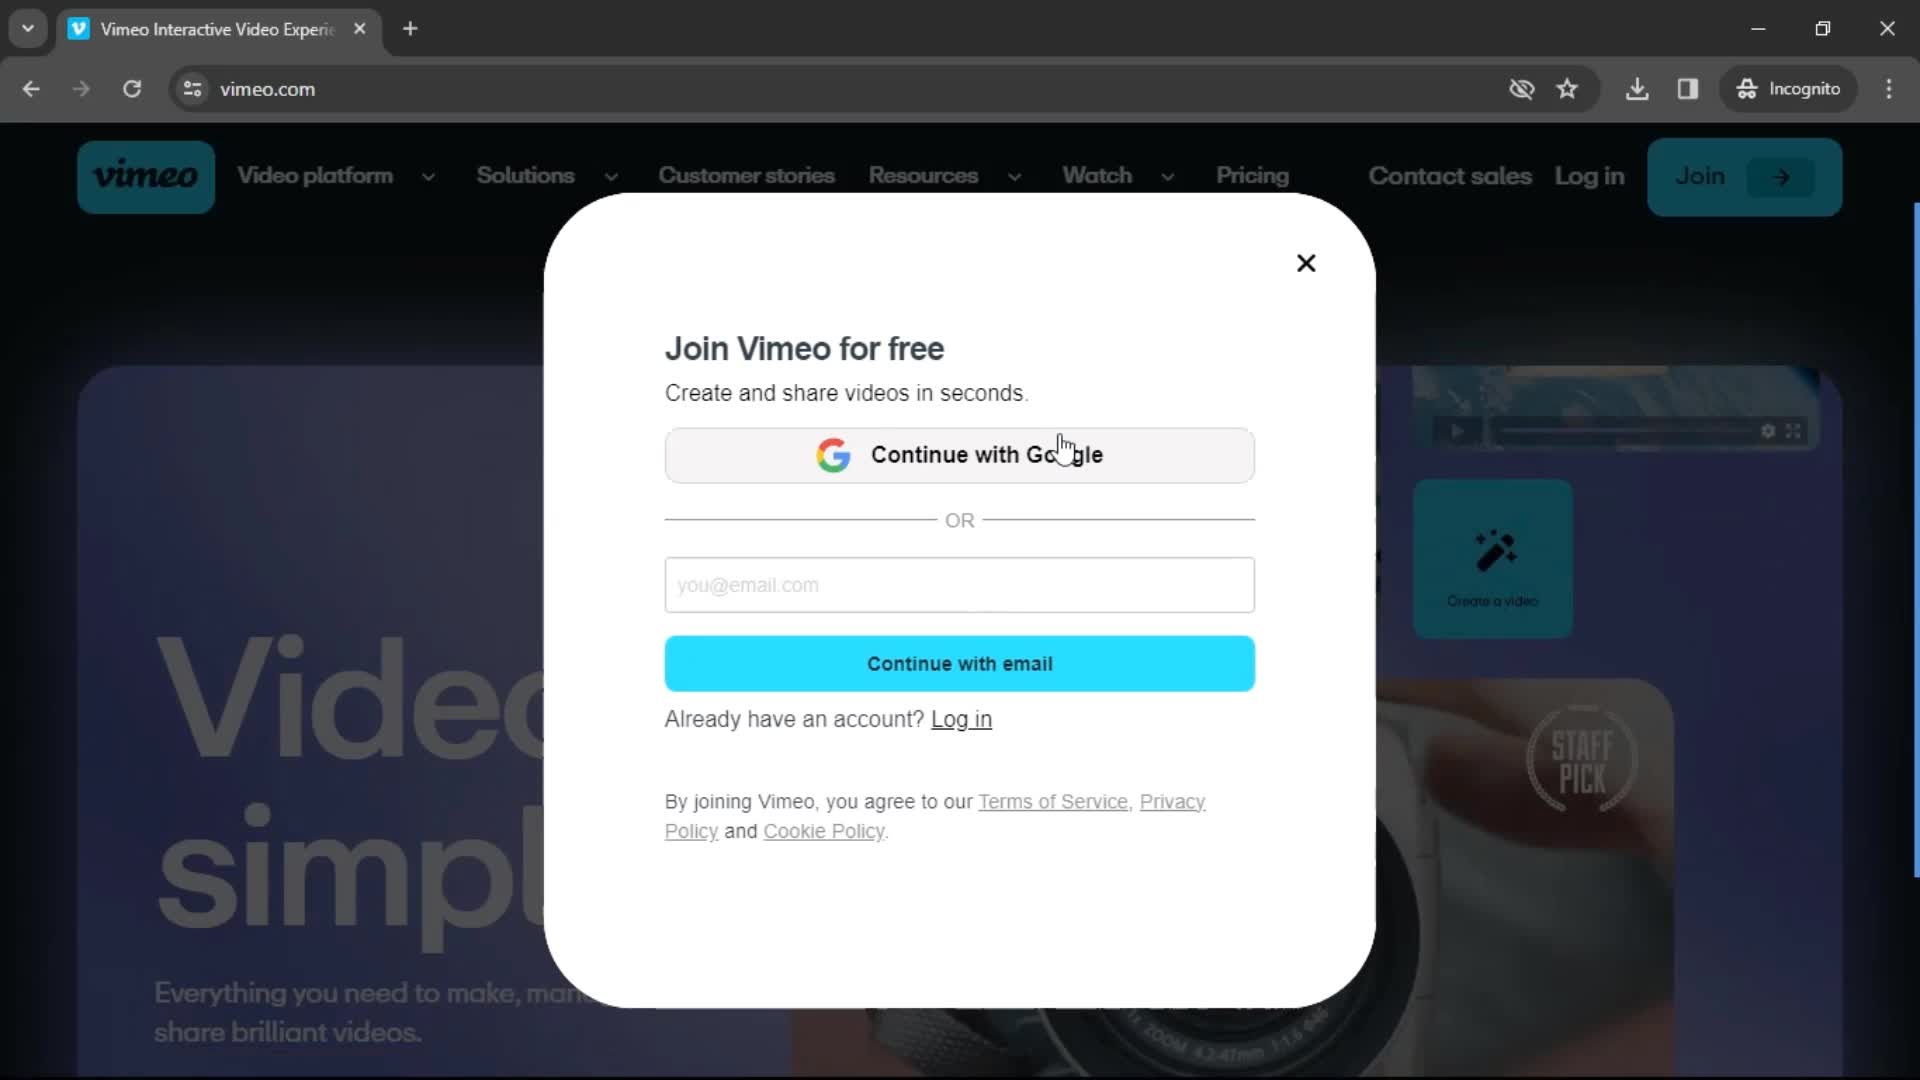 Screenshot of Sign up on Onboarding on Vimeo user flow